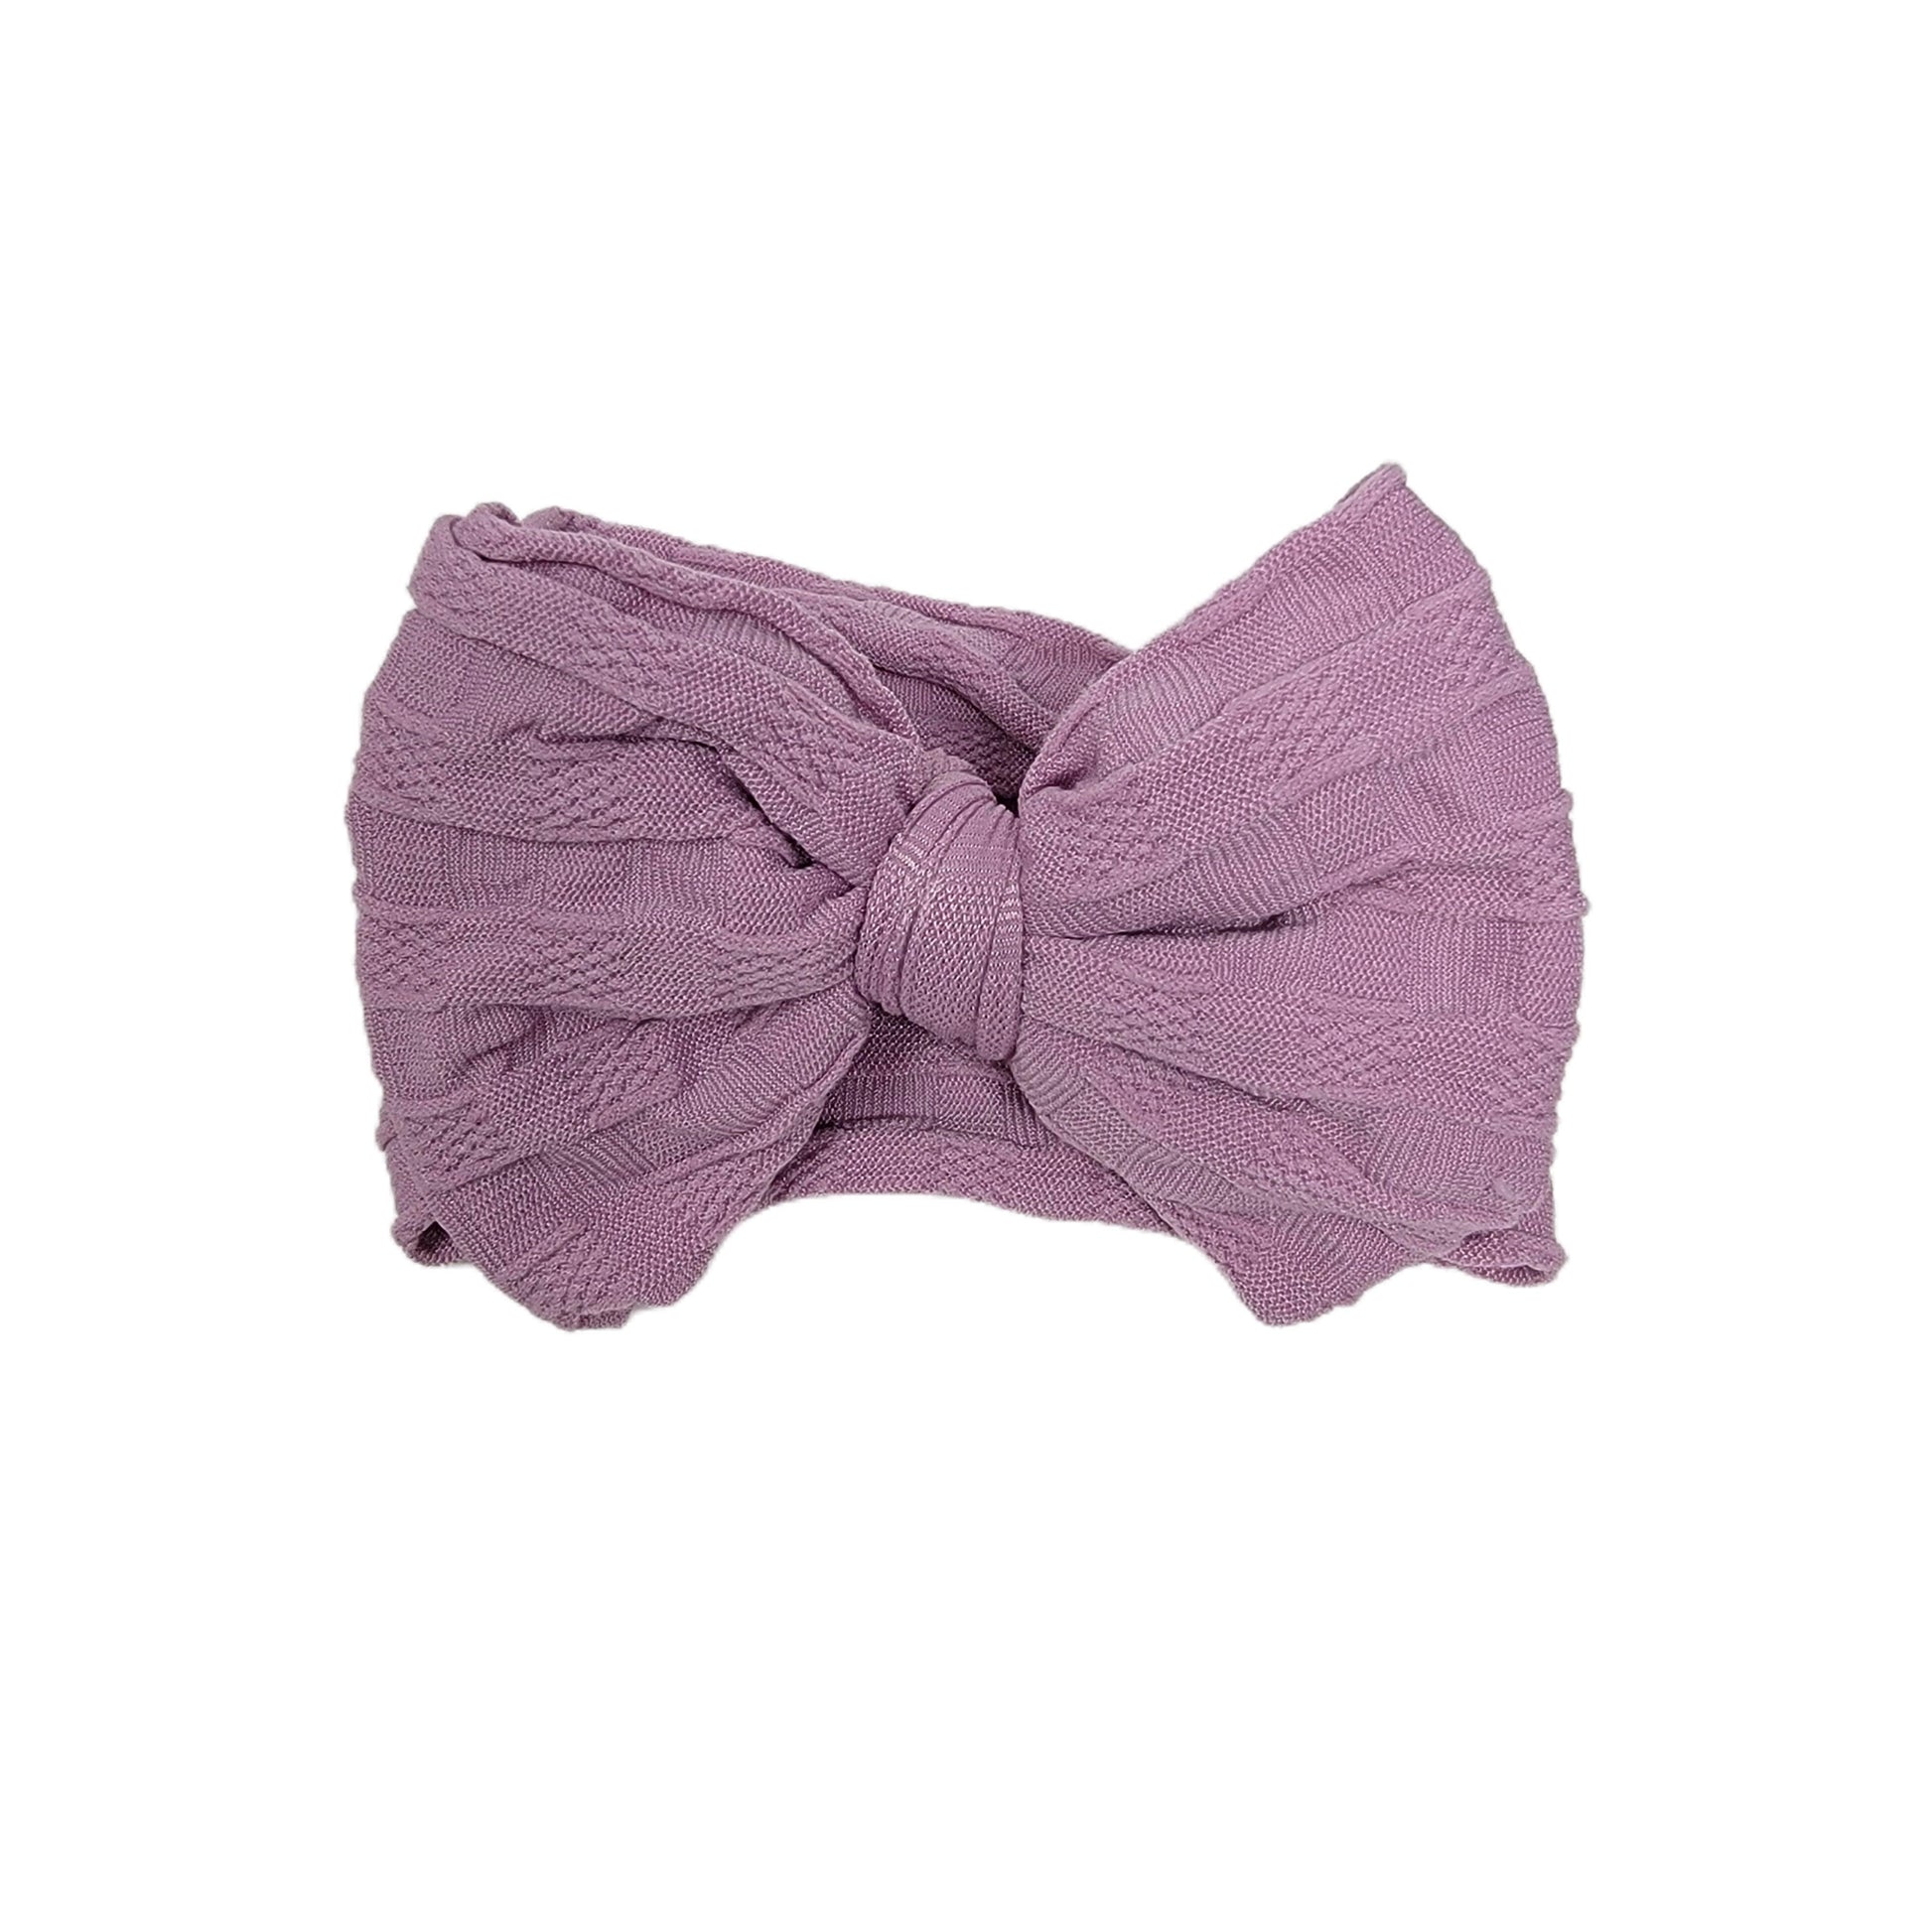 Violet Woven Knit Fabric Headwrap 4" 